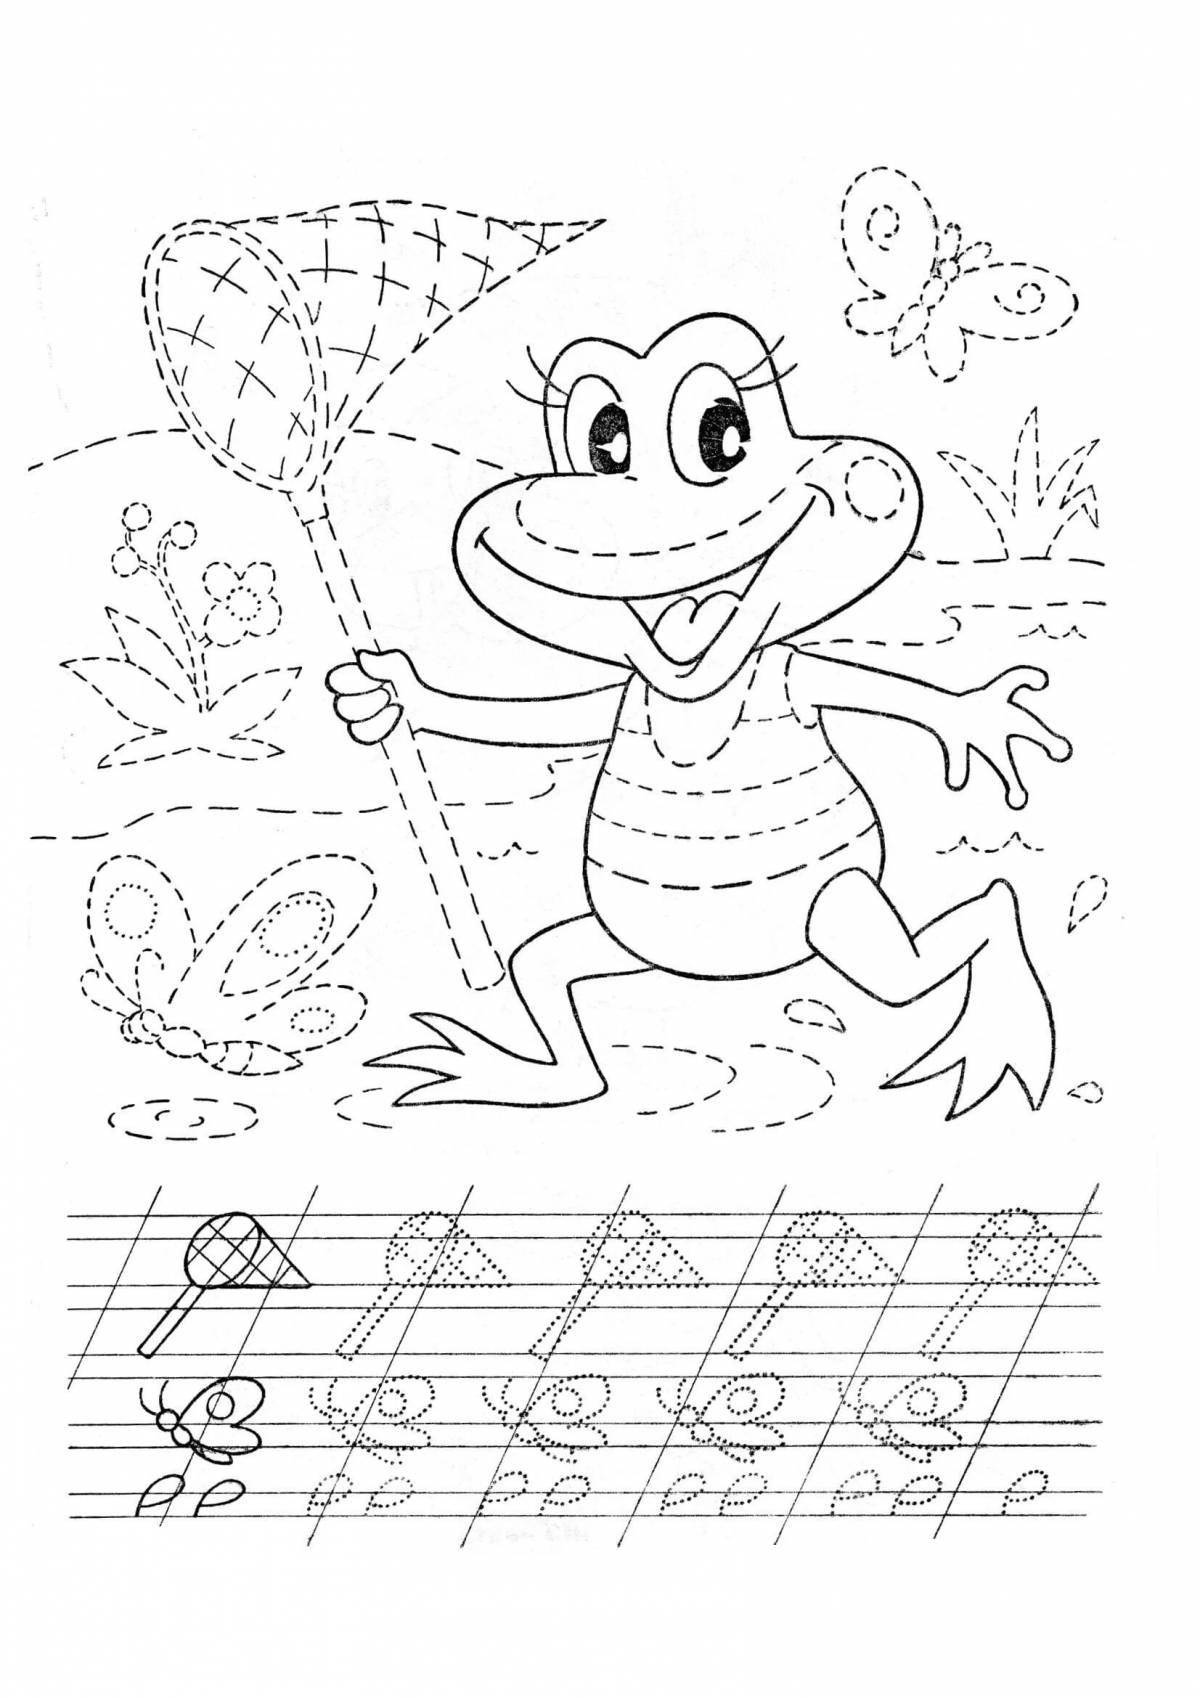 Adorable recipe coloring book for kids